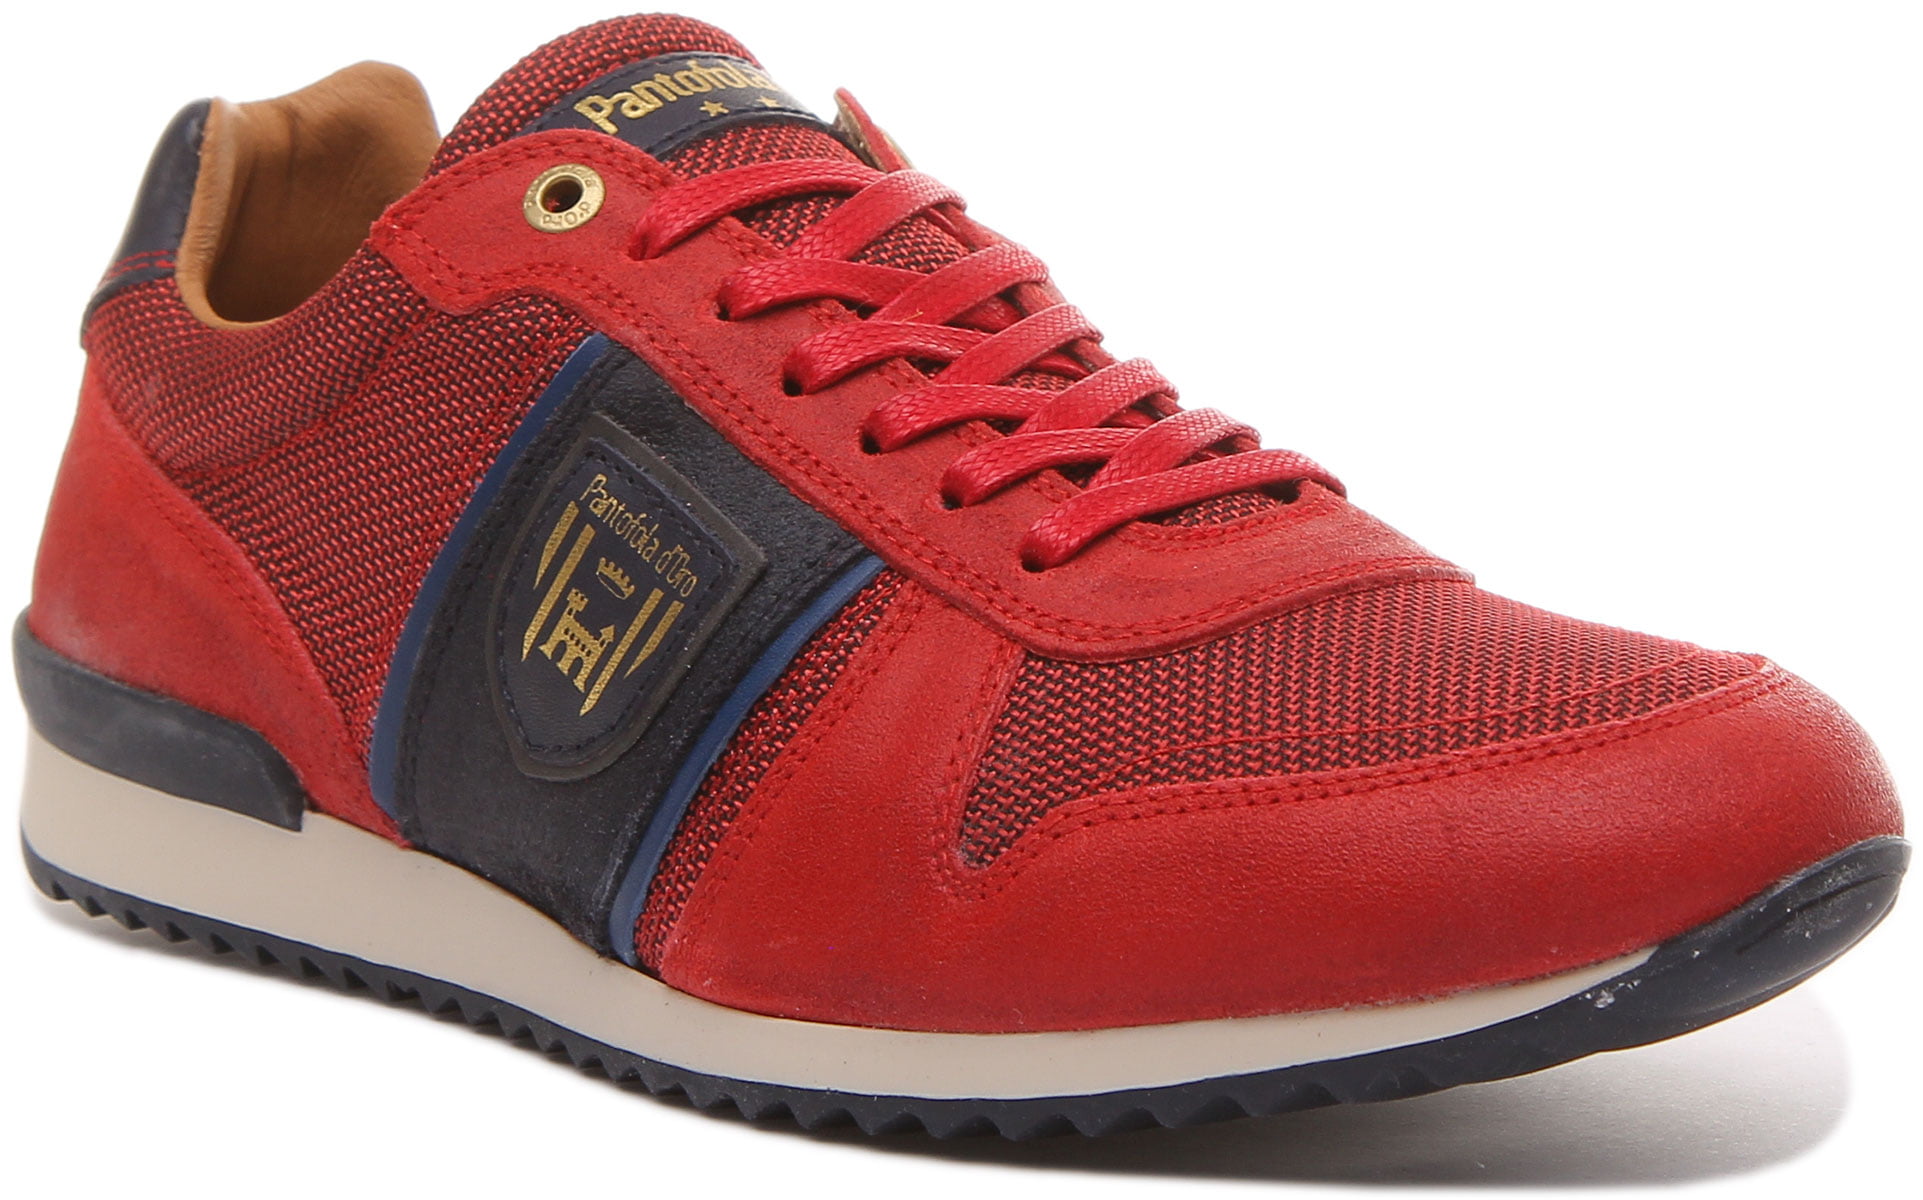 Pantofola D'Oro Uomo Men's Top Up Casual Sneakers In Red Size 11 - Walmart.com